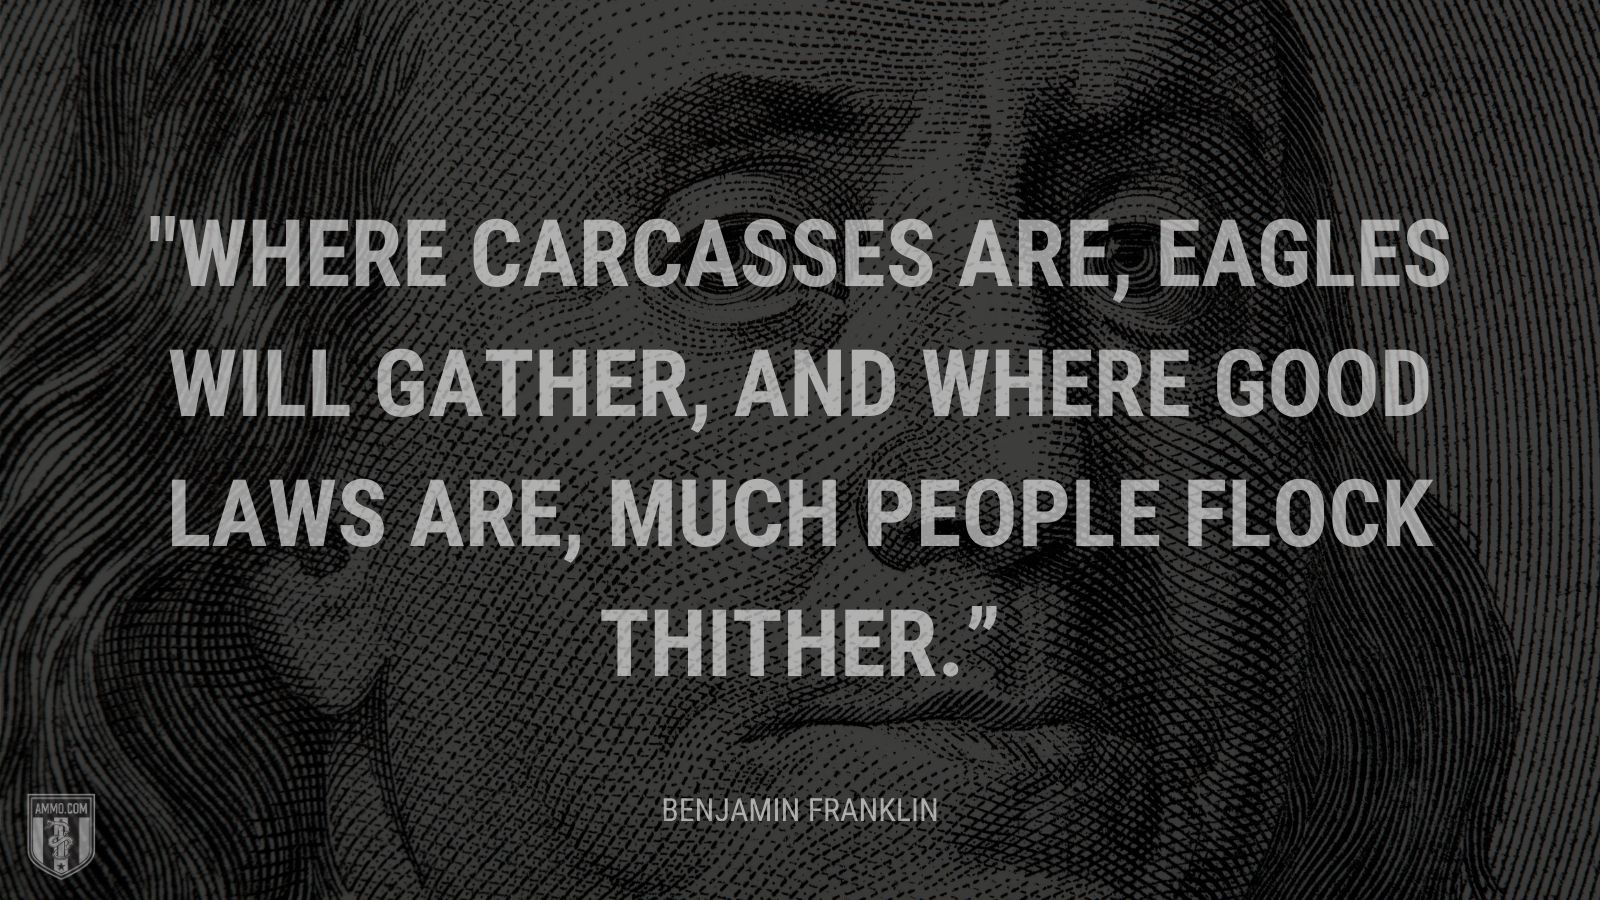 “Where carcasses are, eagles will gather, And where good laws are, much people flock thither.” - Benjamin Franklin